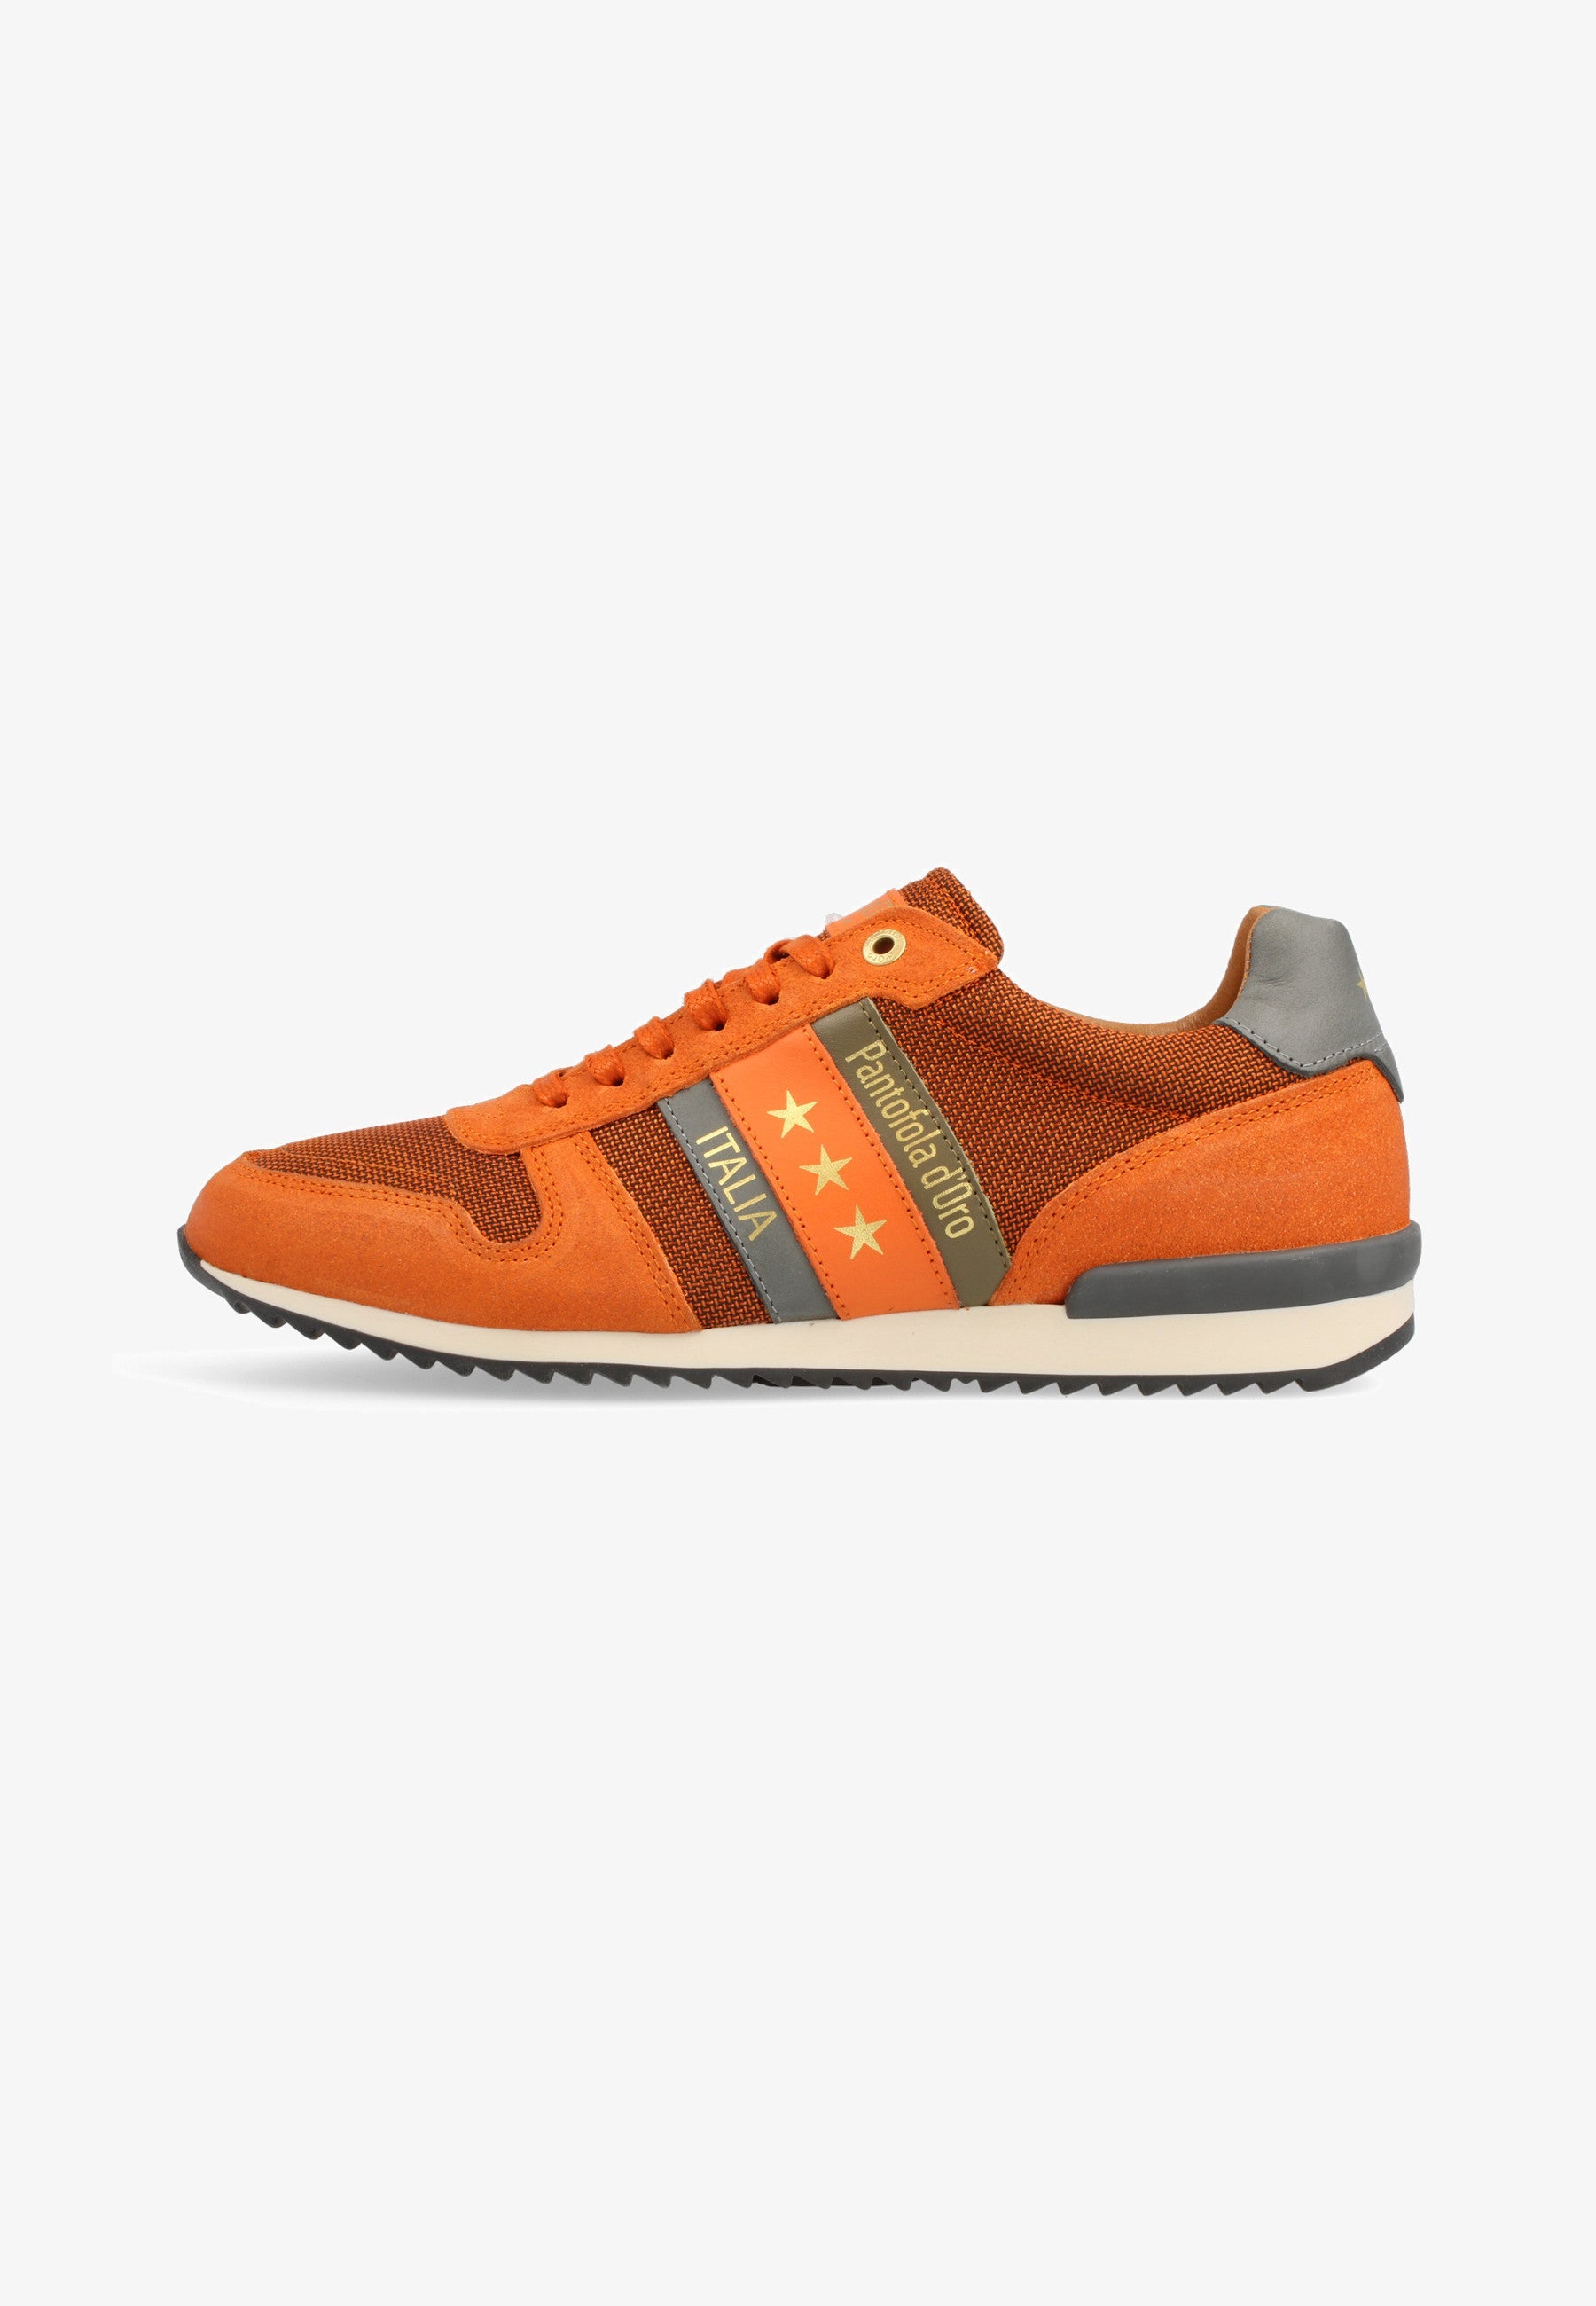 Rizza N Low in Orange Sneakers Pantofola d'Oro   